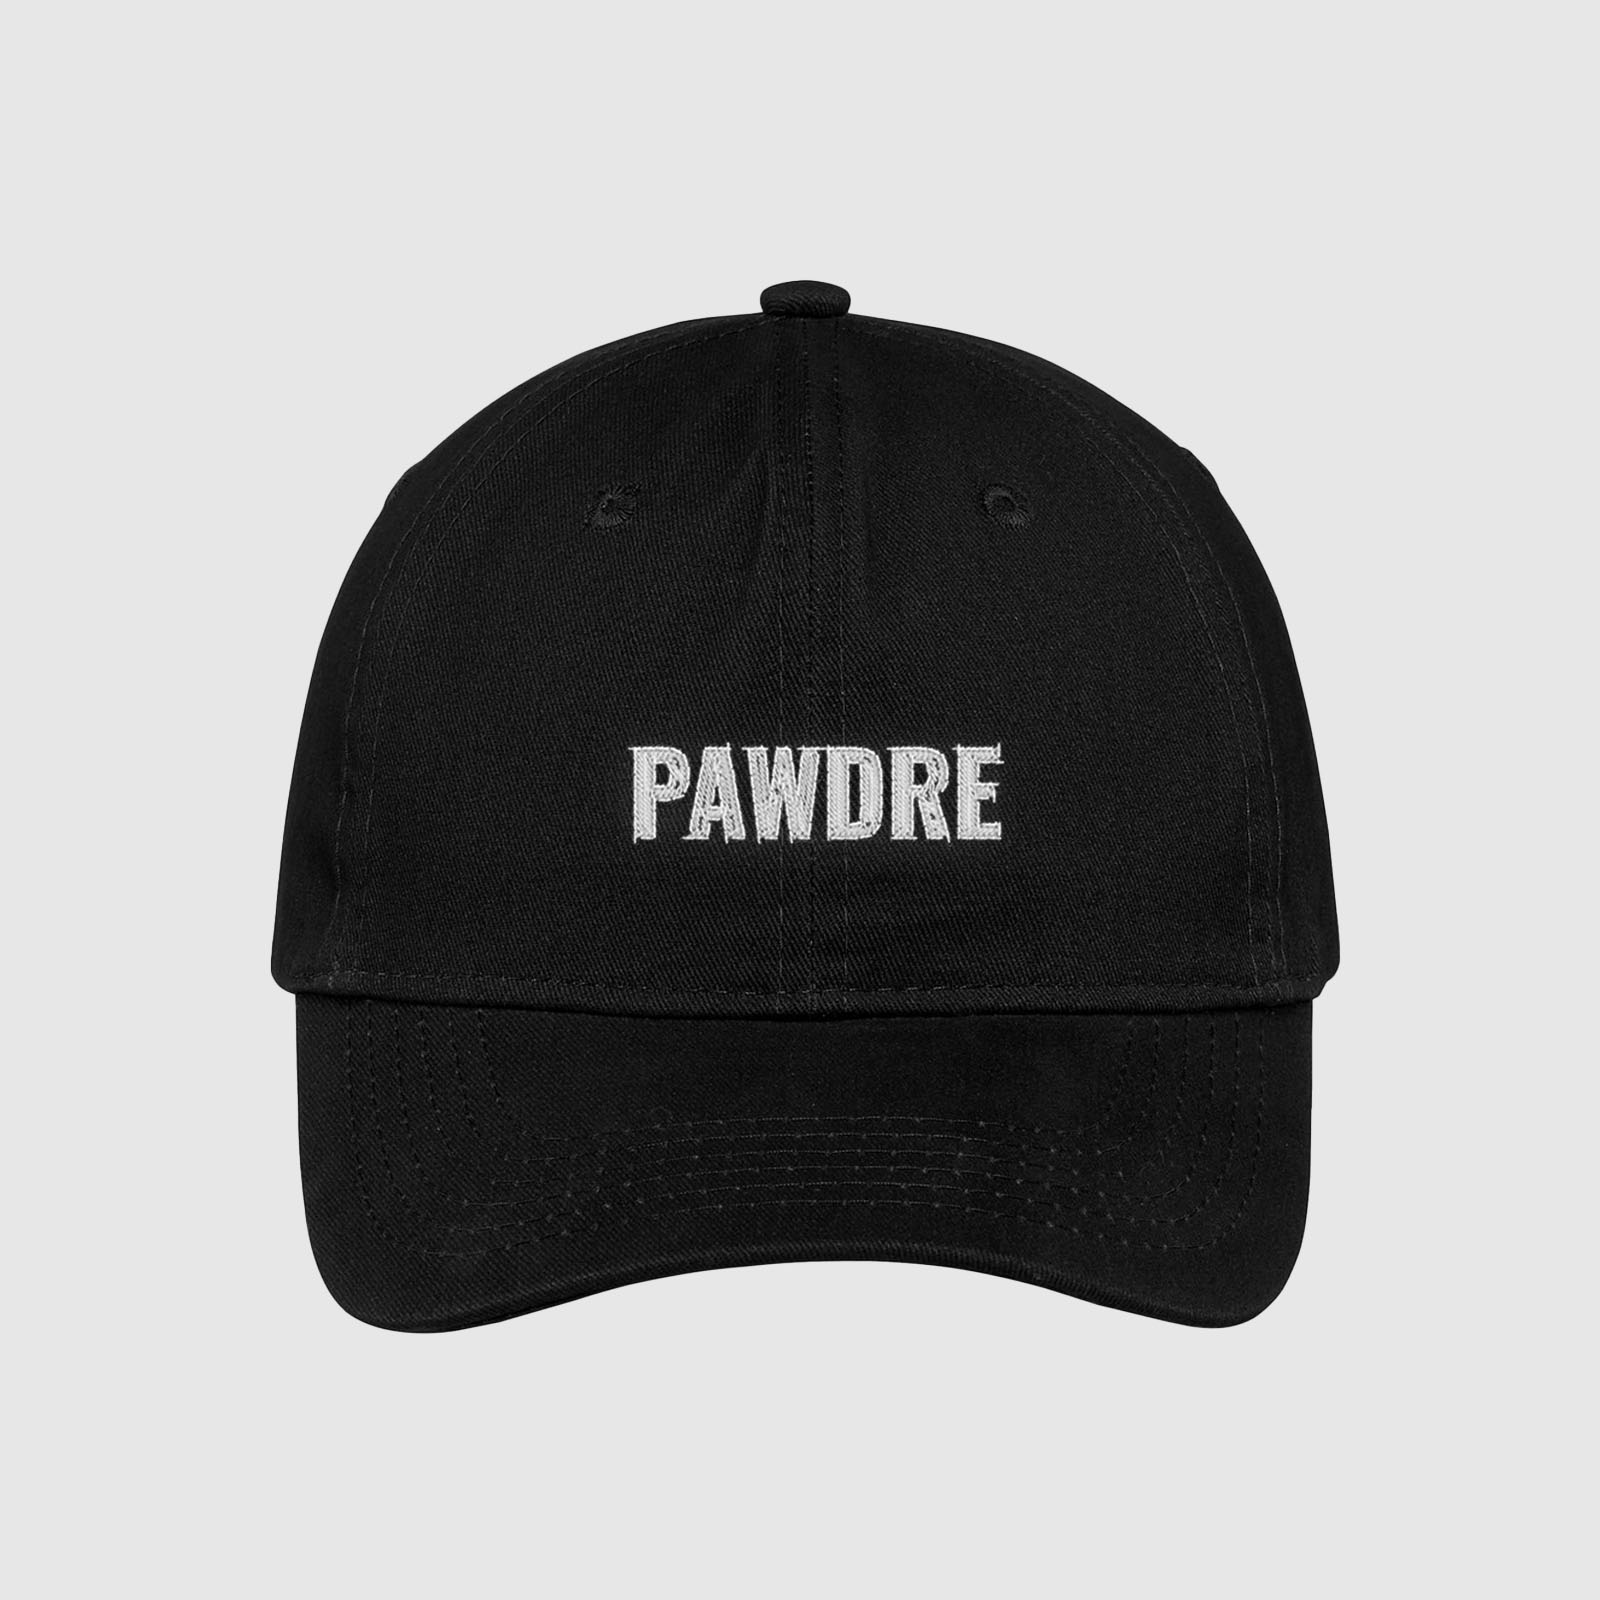 Black Pawdre Hat embroidered with white text.